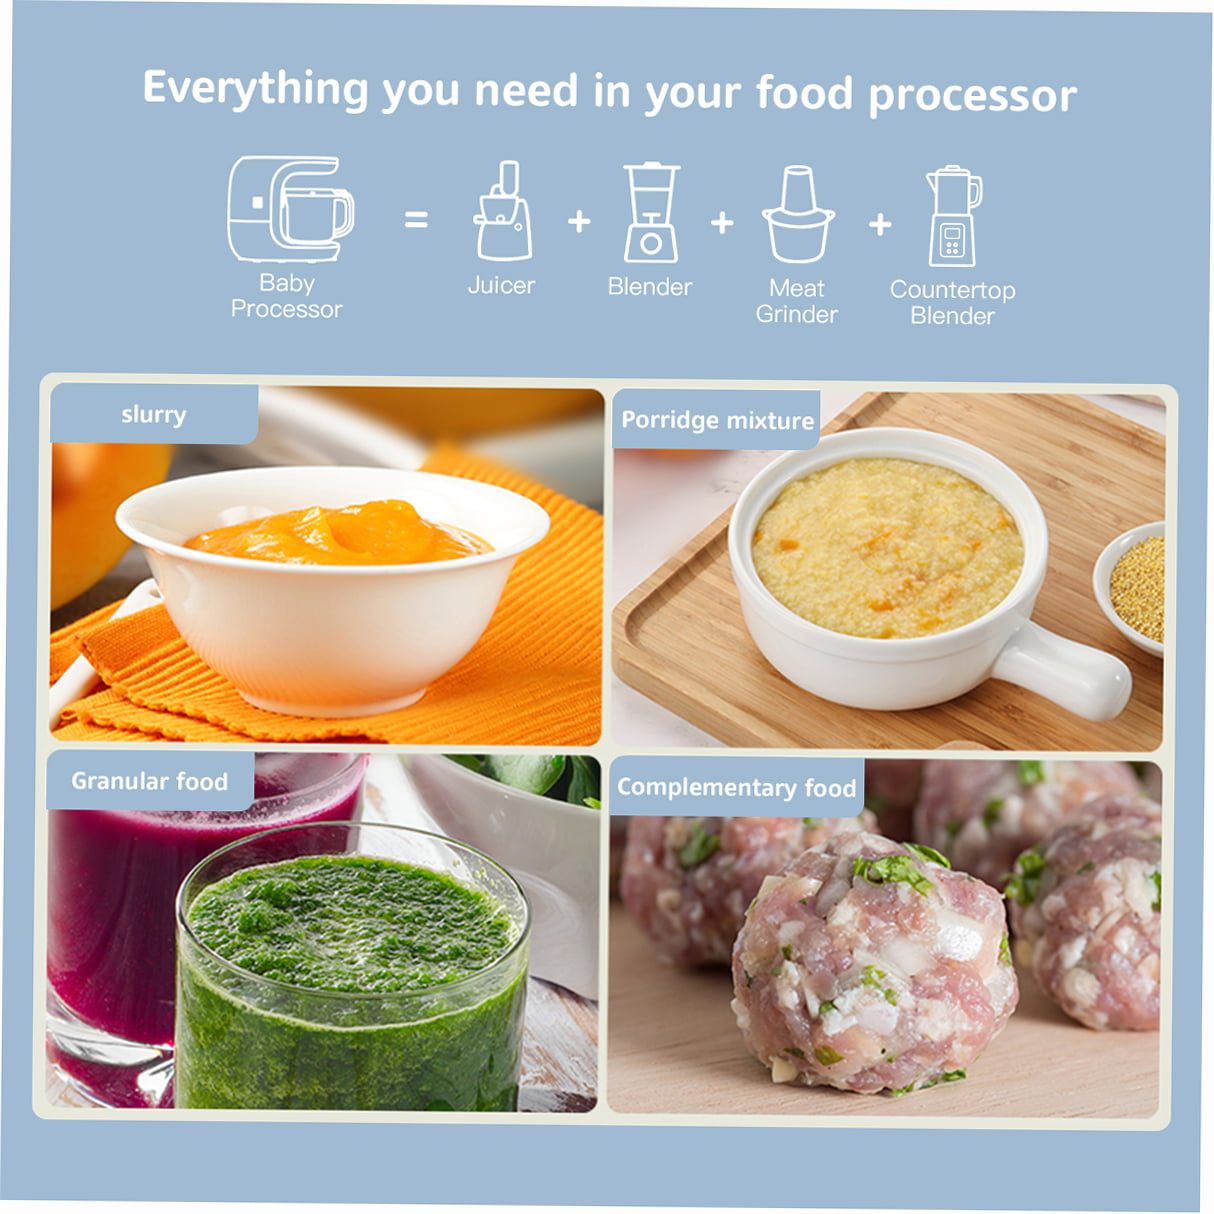 Self-Warming Food Processors: The Moulinex Soup & Co Creates Hot and  Ready-To-Eat Meals